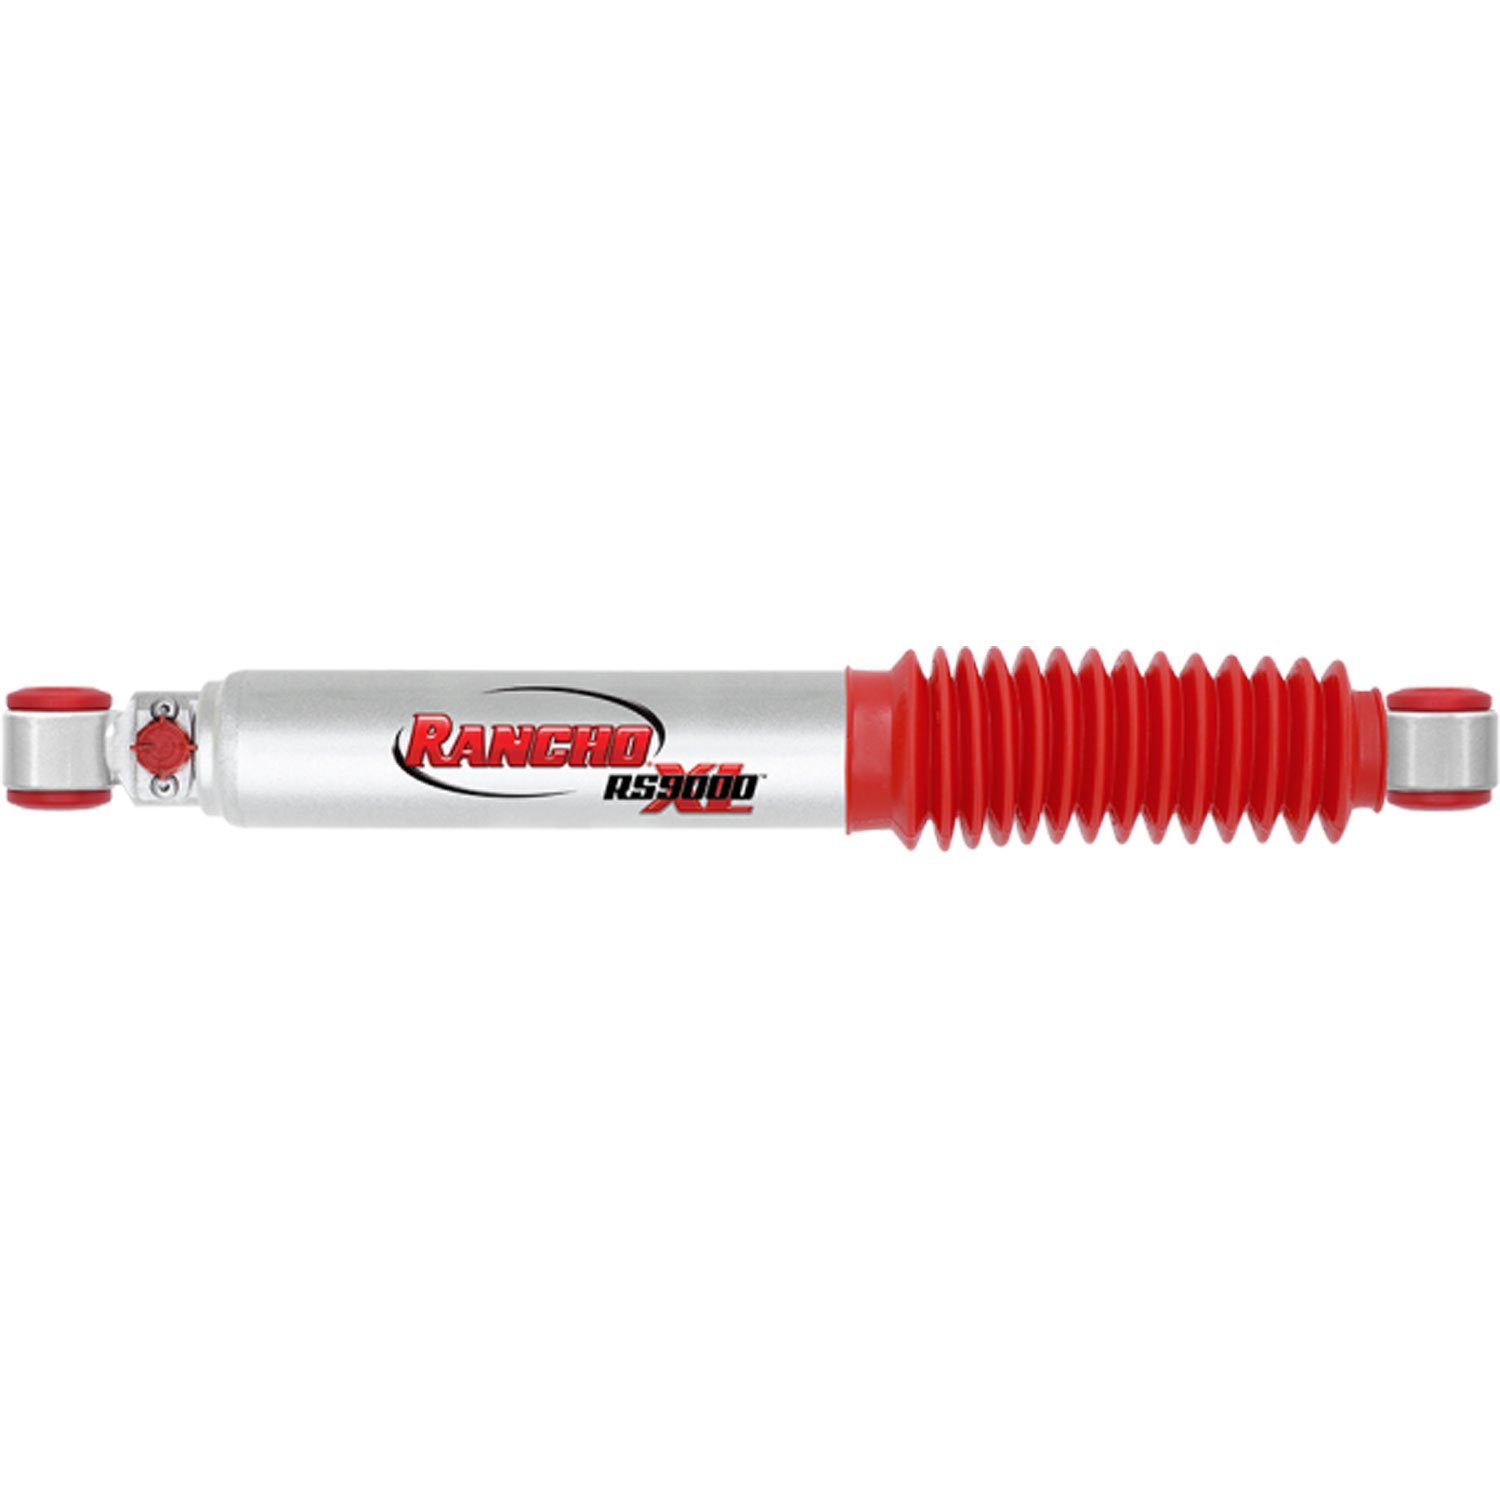 RS9000XL Rear Shock Absorber Fits Dodge Pickups, Jeep CJs, Suzuki Samurai and Toyotas